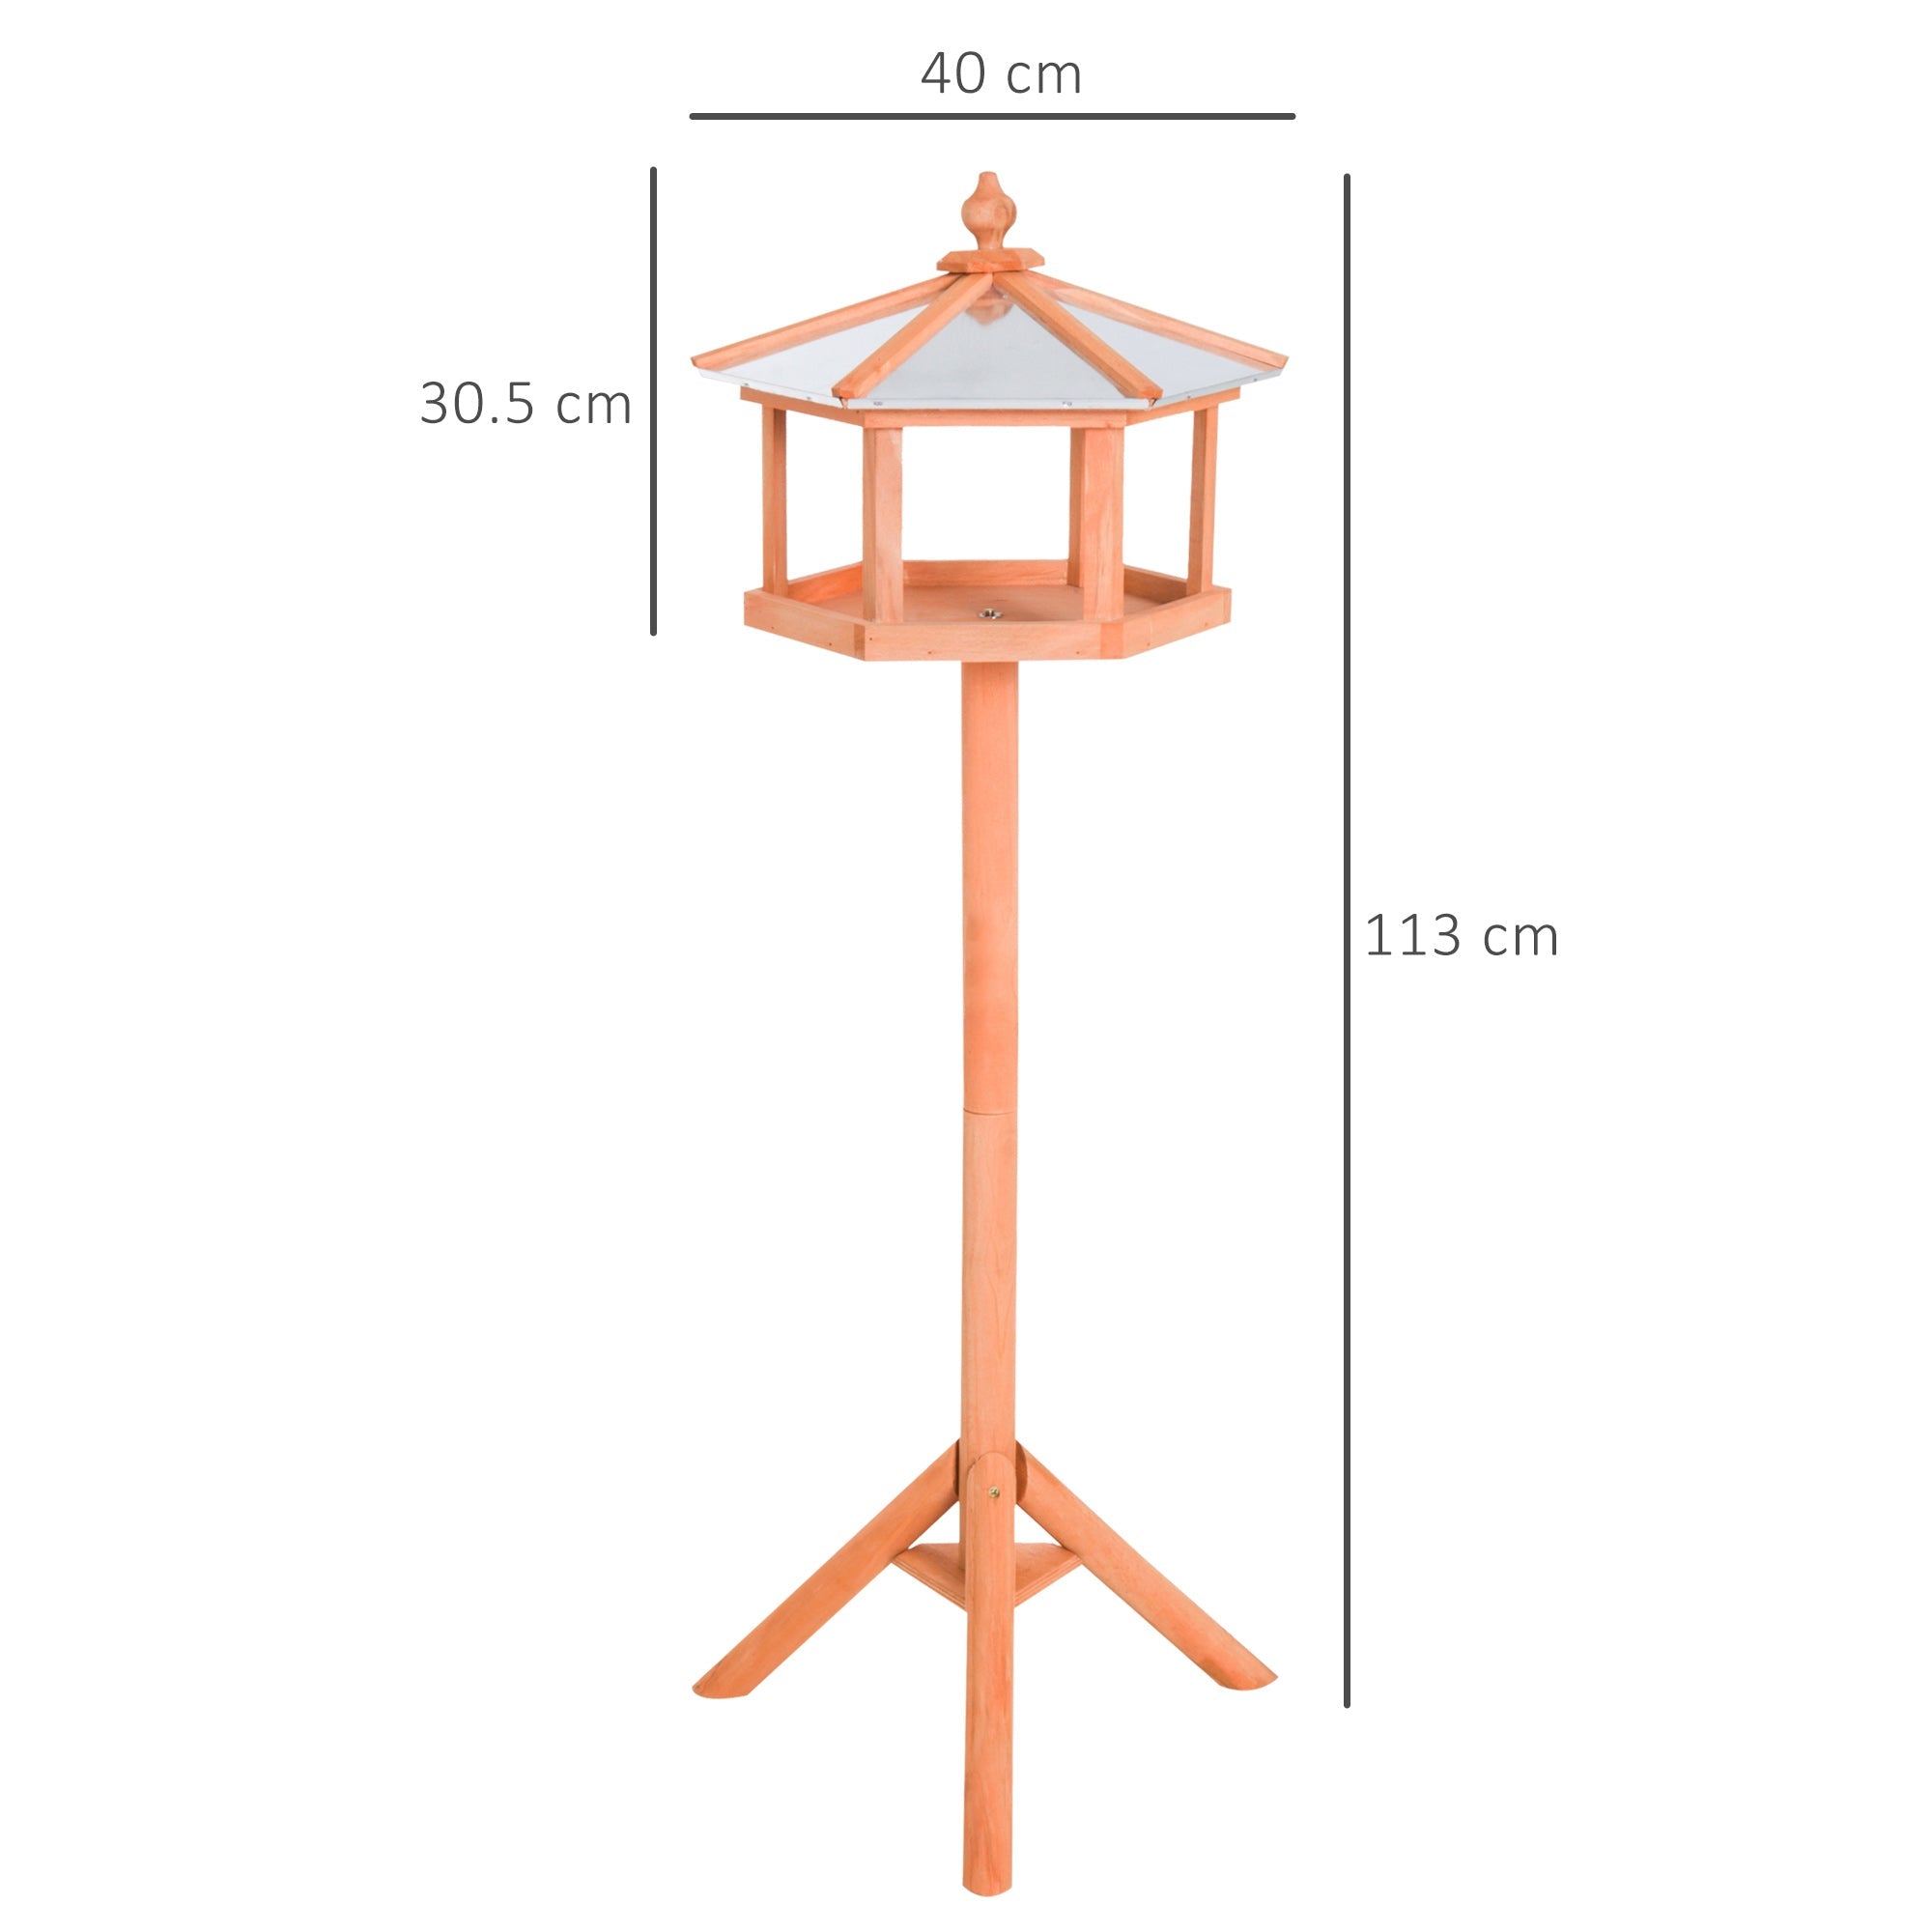 Deluxe Bird Stand Feeder Table Feeding Station Wooden Garden Wood Coop Parrot Stand 113cm High New-2